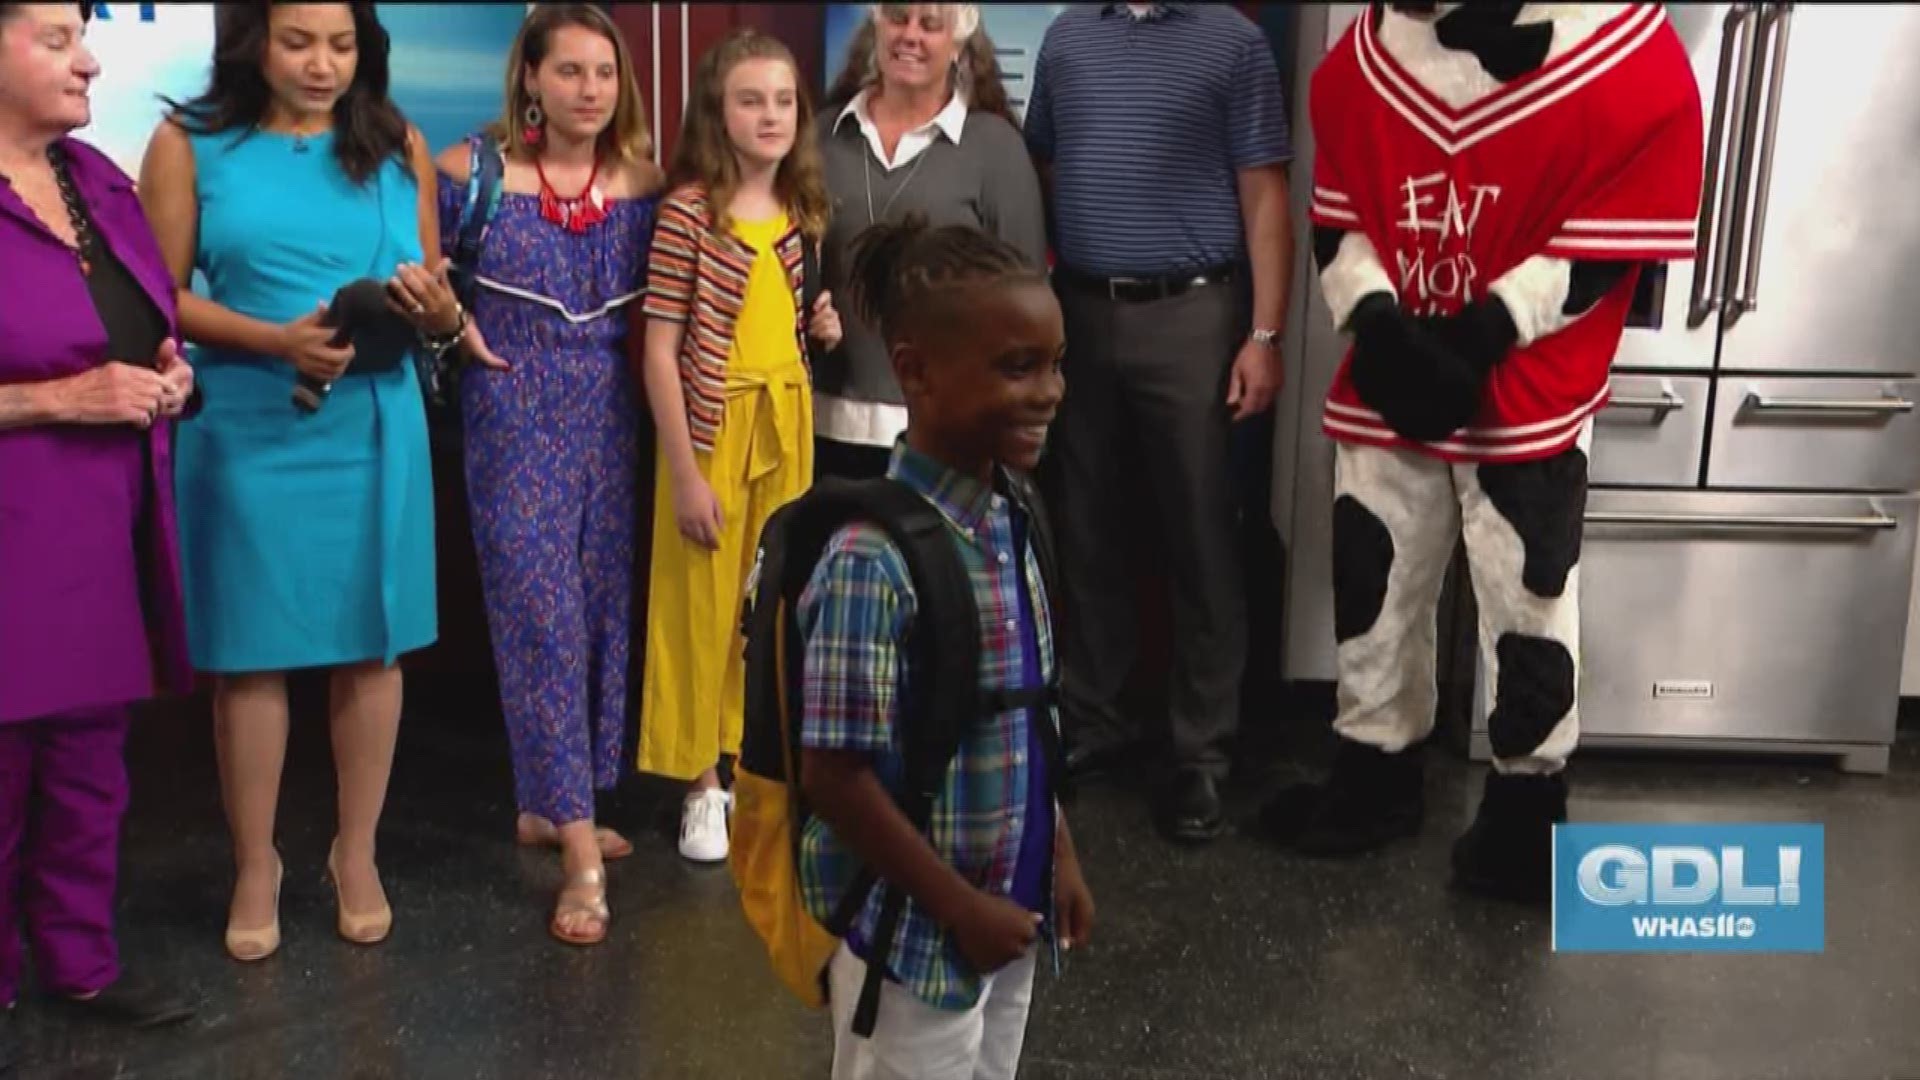 You can see the fashion council in their element on Saturday, August 3, 2019 at the Mall Saint Matthews.
They're putting on two back-to-school fashion shows at 1 PM and 3 PM, and admission is free. You can learn more about the program at FashionCouncilLouisville.com.